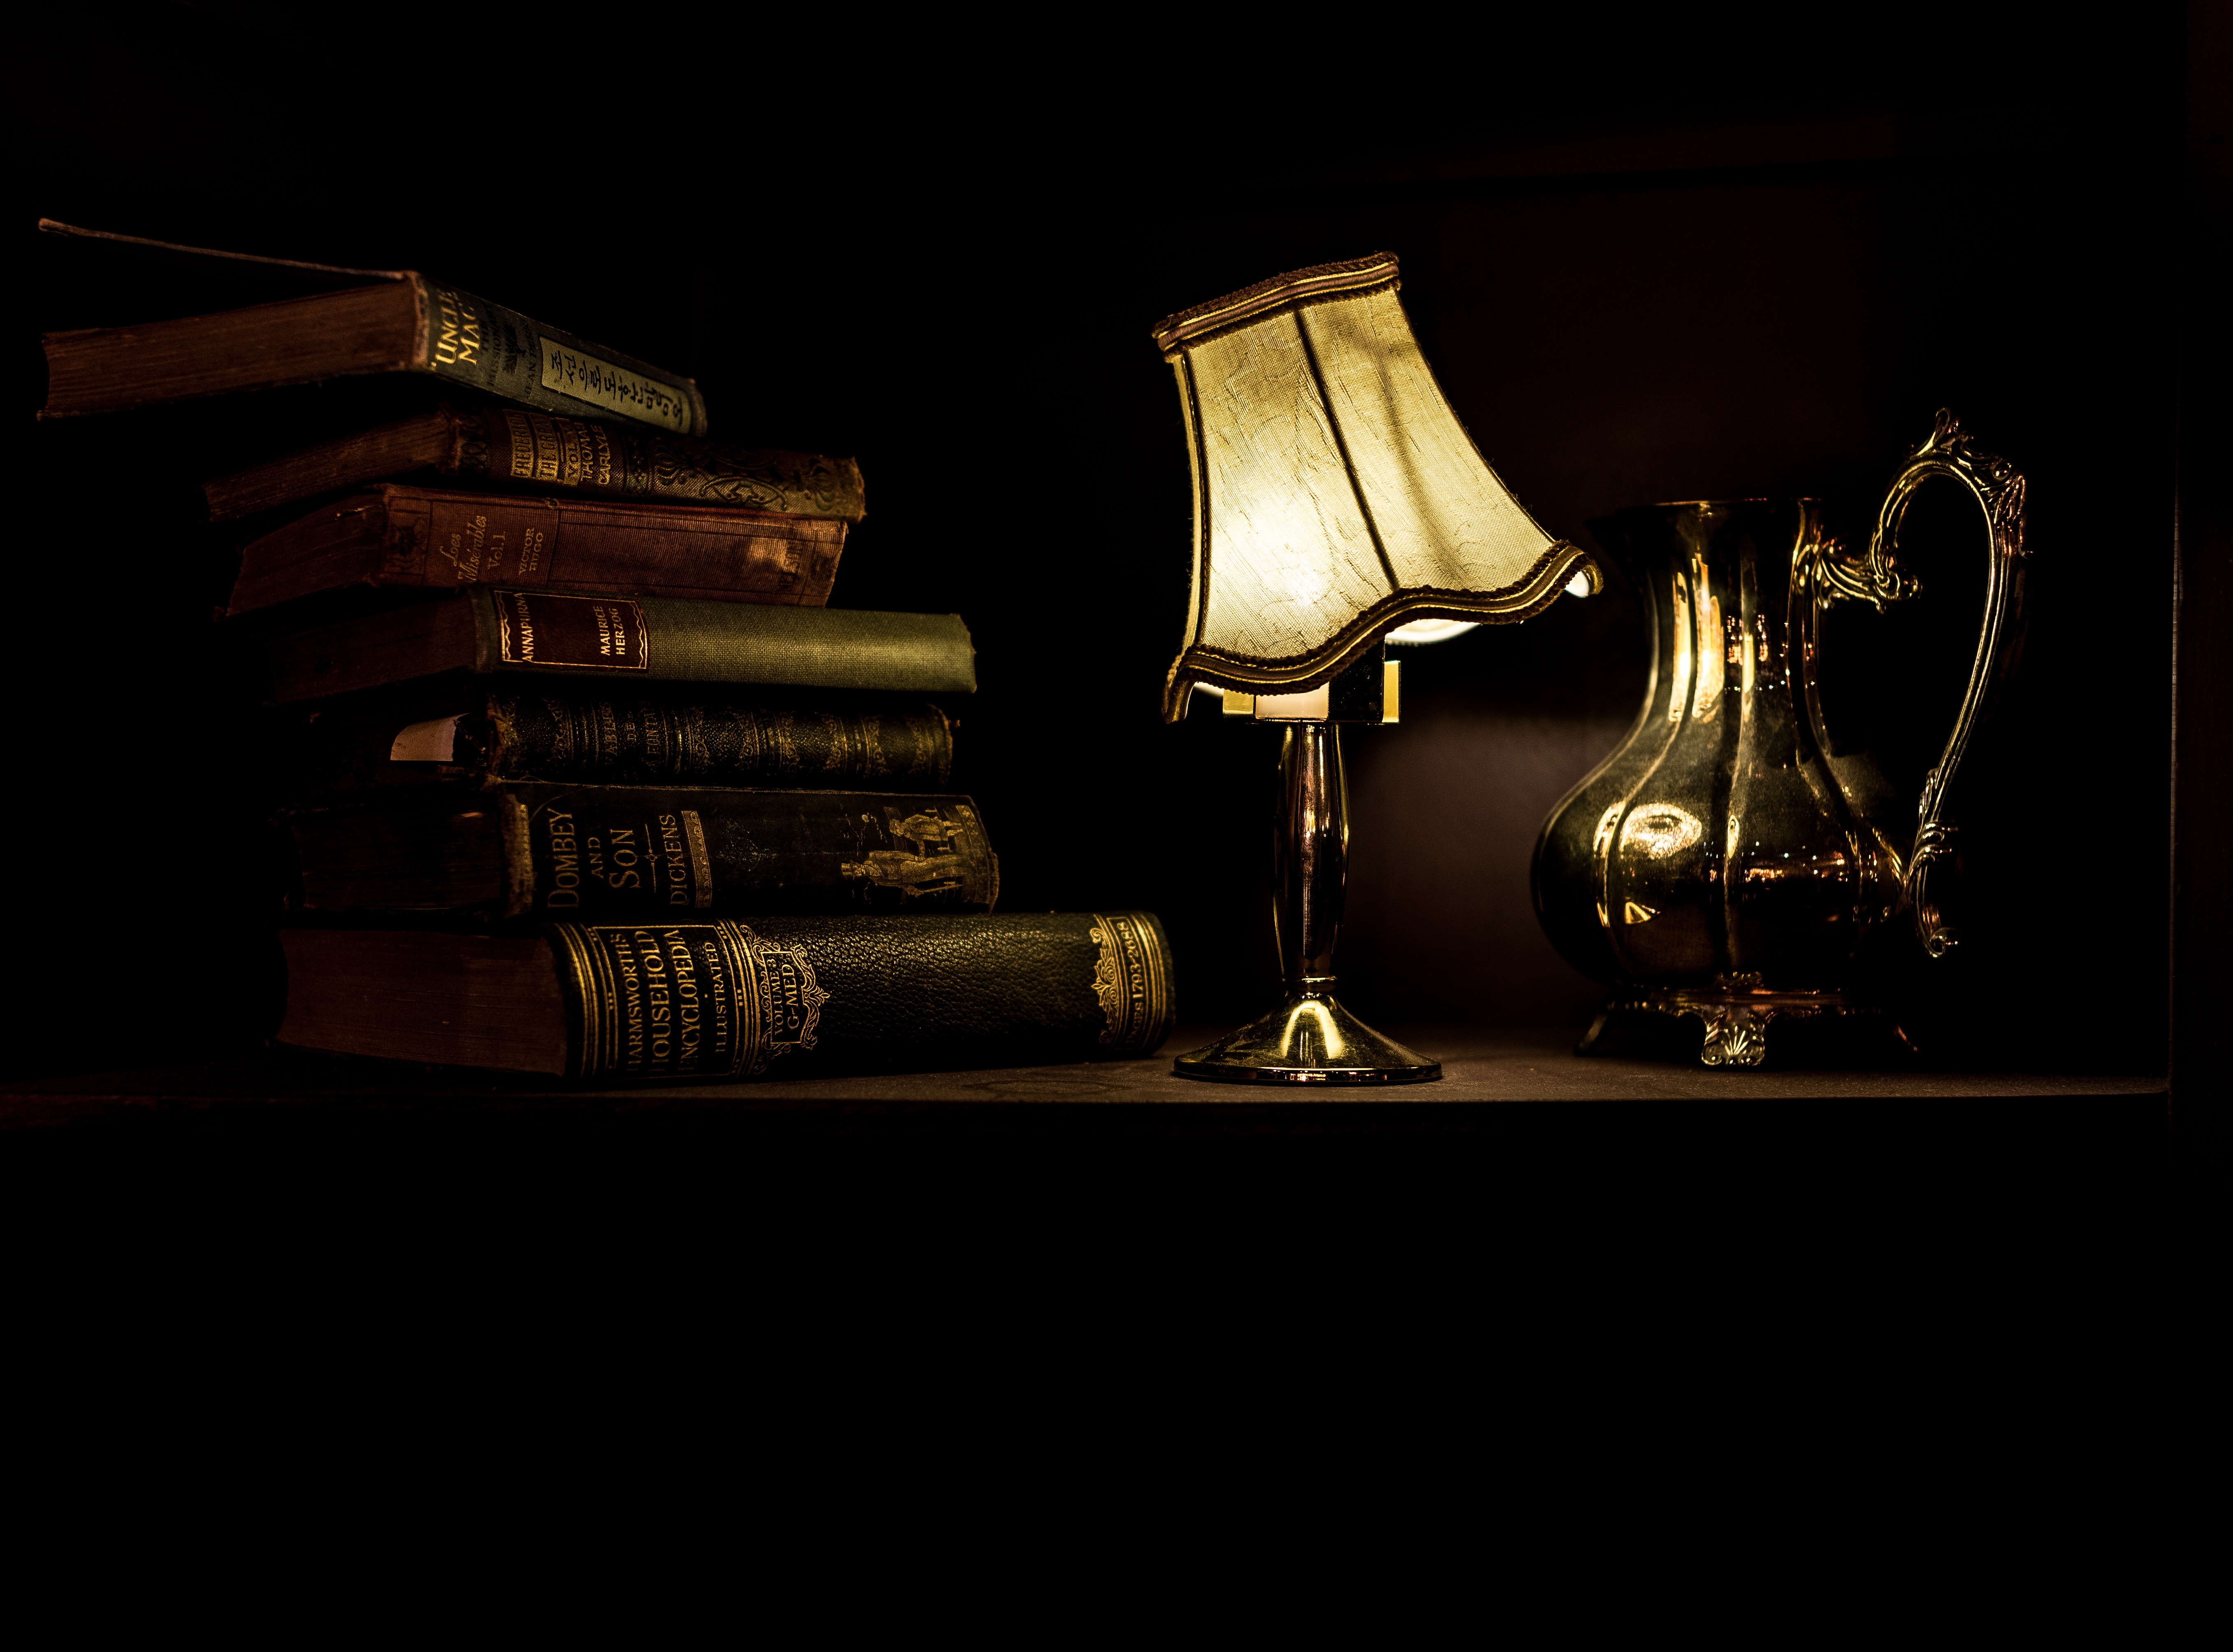 Lamp and old book, Book, Lamp, Life, Light, HQ Photo